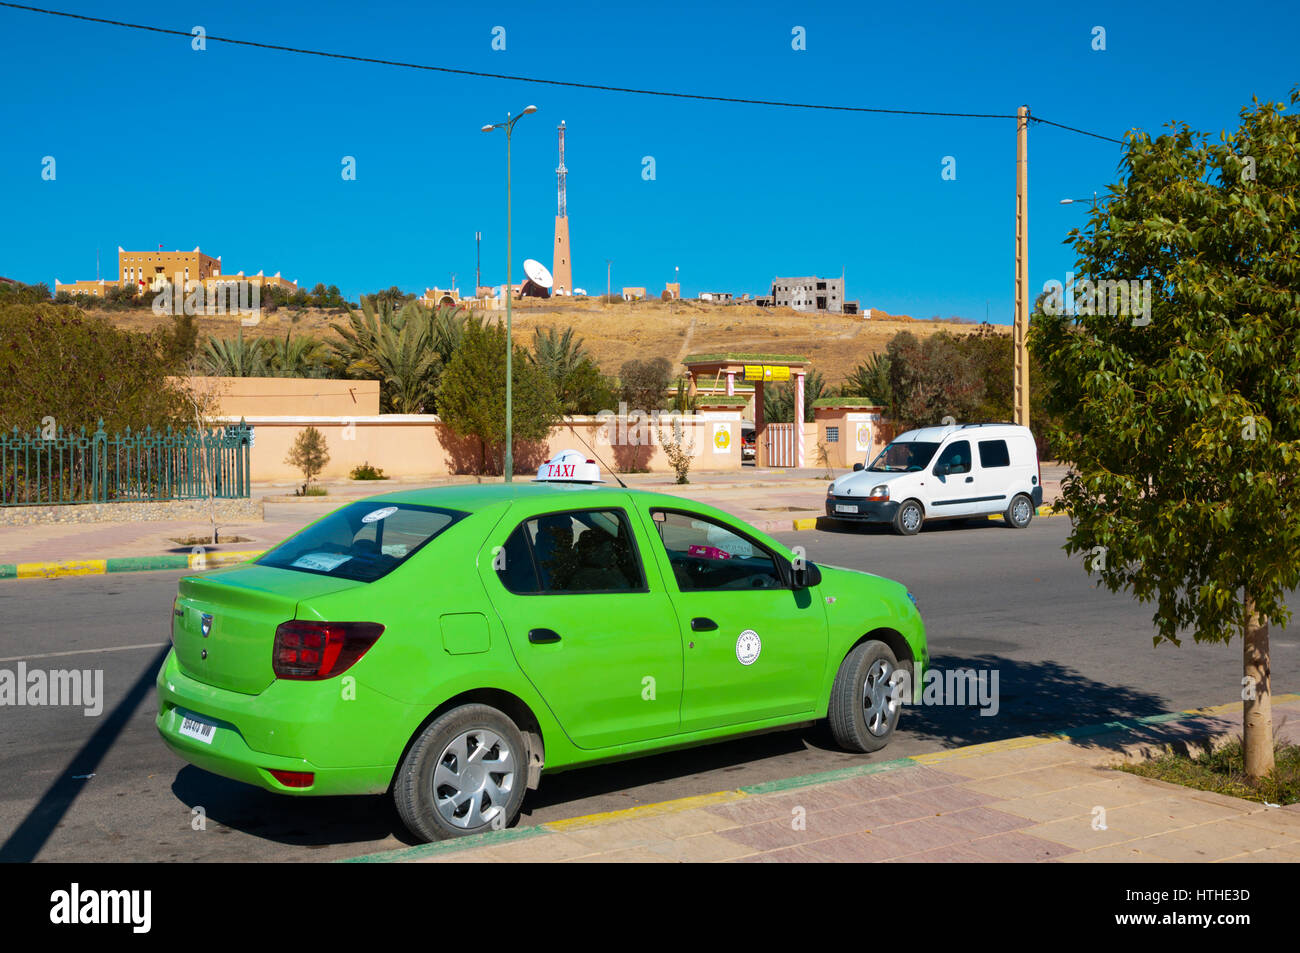 Petit taxi, in front of bus station, Tata, Morocco Stock Photo